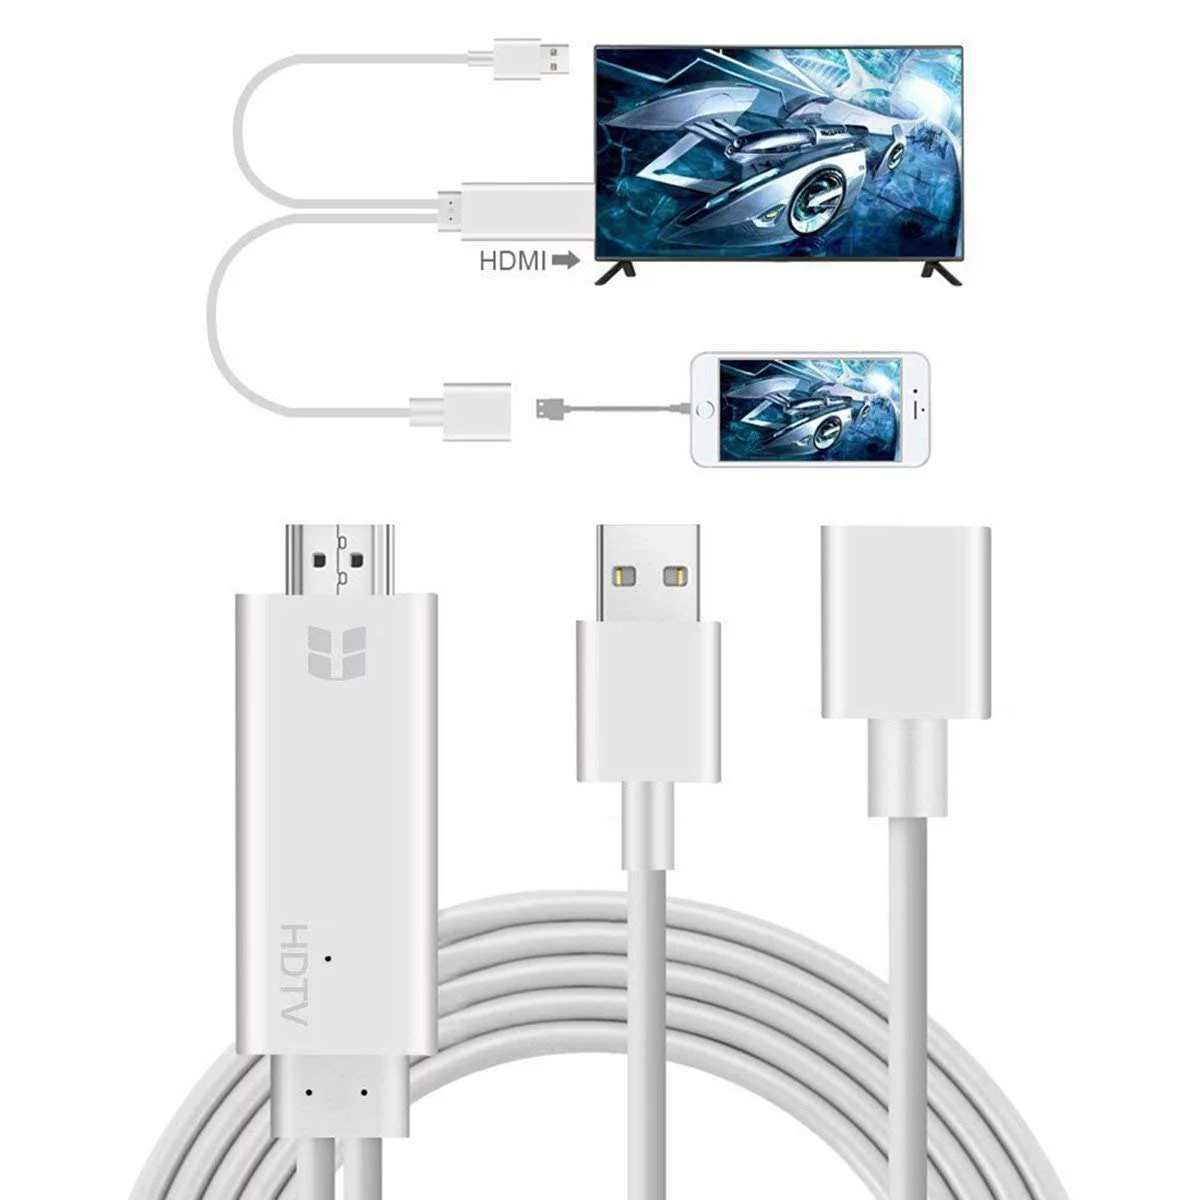 3 in 1 Smartphone to HDMI/Micro USB/TYPE C Adapter , Lightning to HDMI 1080P Digital AV Adapter, iPhone HDMI Cables Adapter, S7 HDMI Cable to TV, for iPhone/iPad/S9/S8/Note 8 and More, I0370